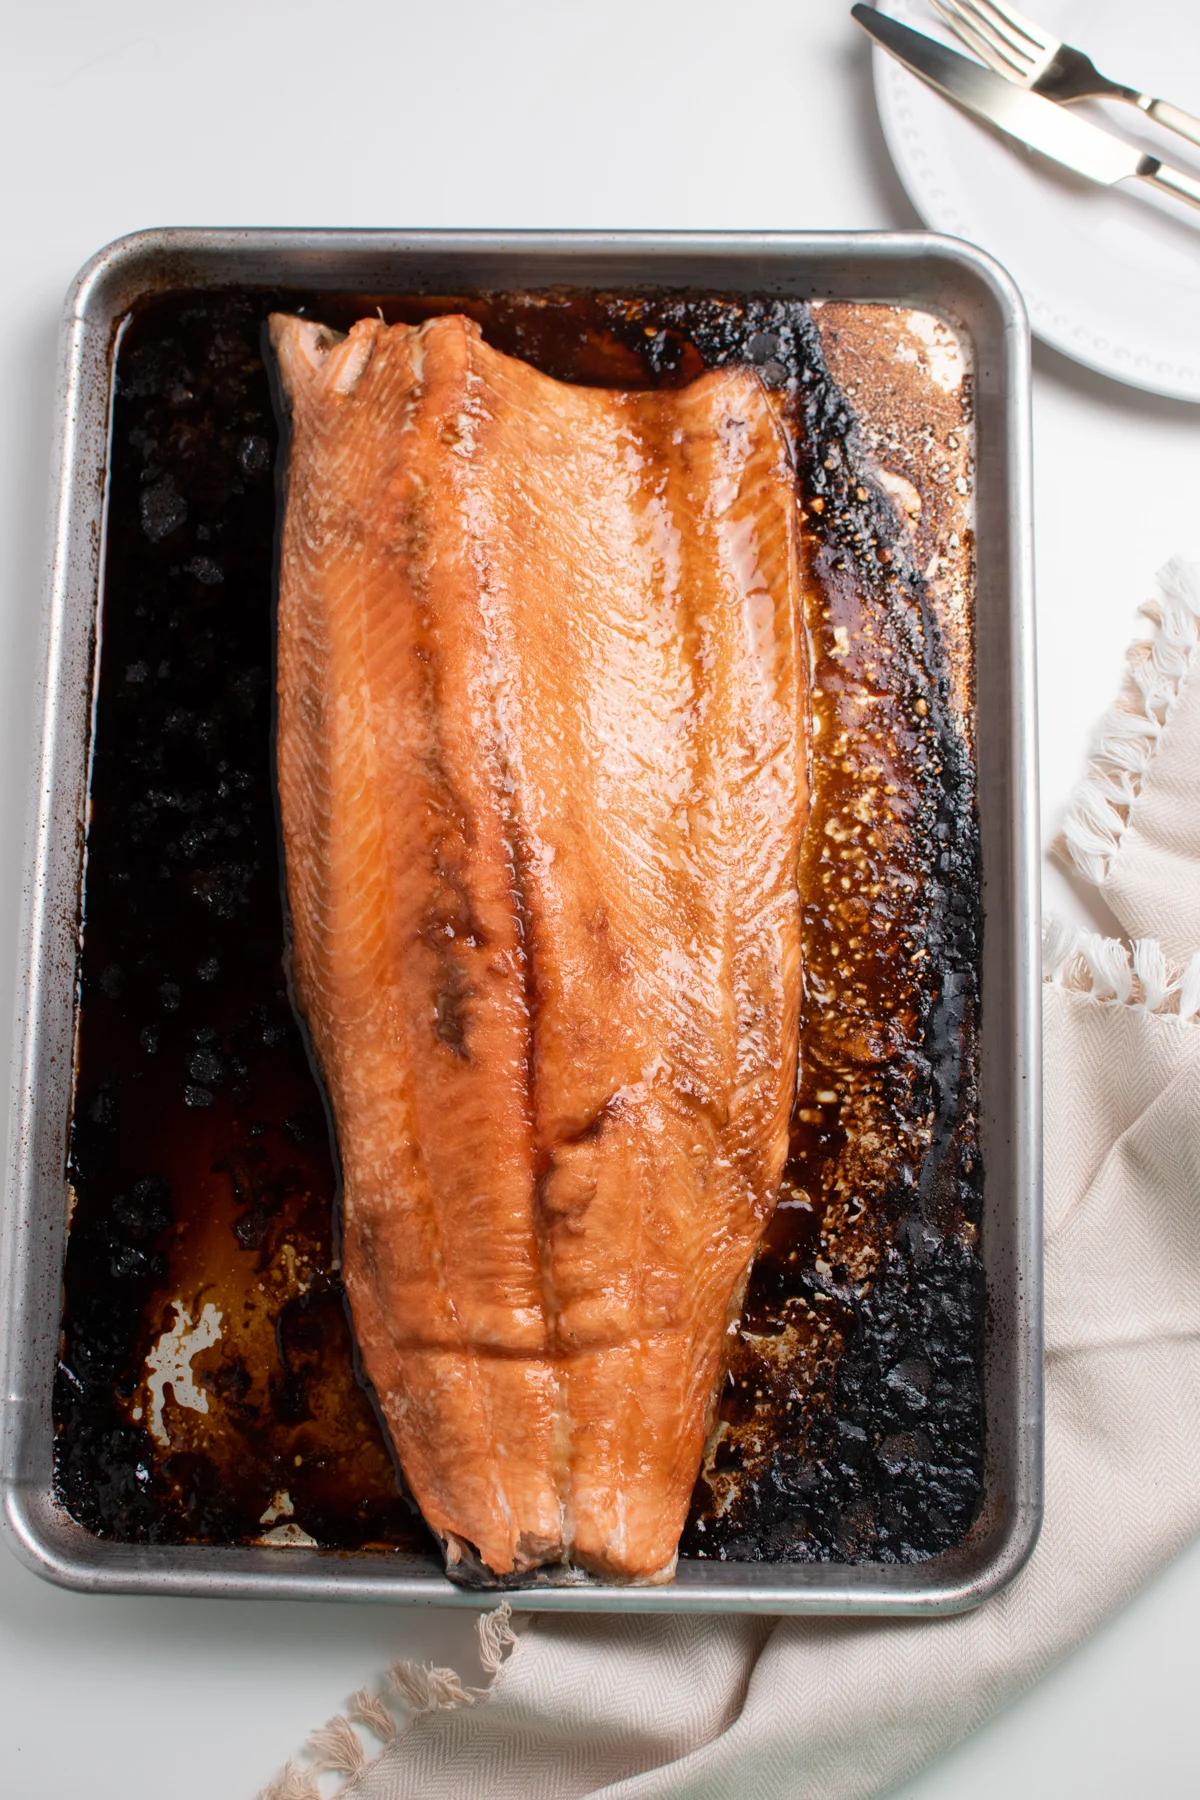 Cooked brown sugar salmon fillet on a baking sheet next to cream colored kitchen towel.